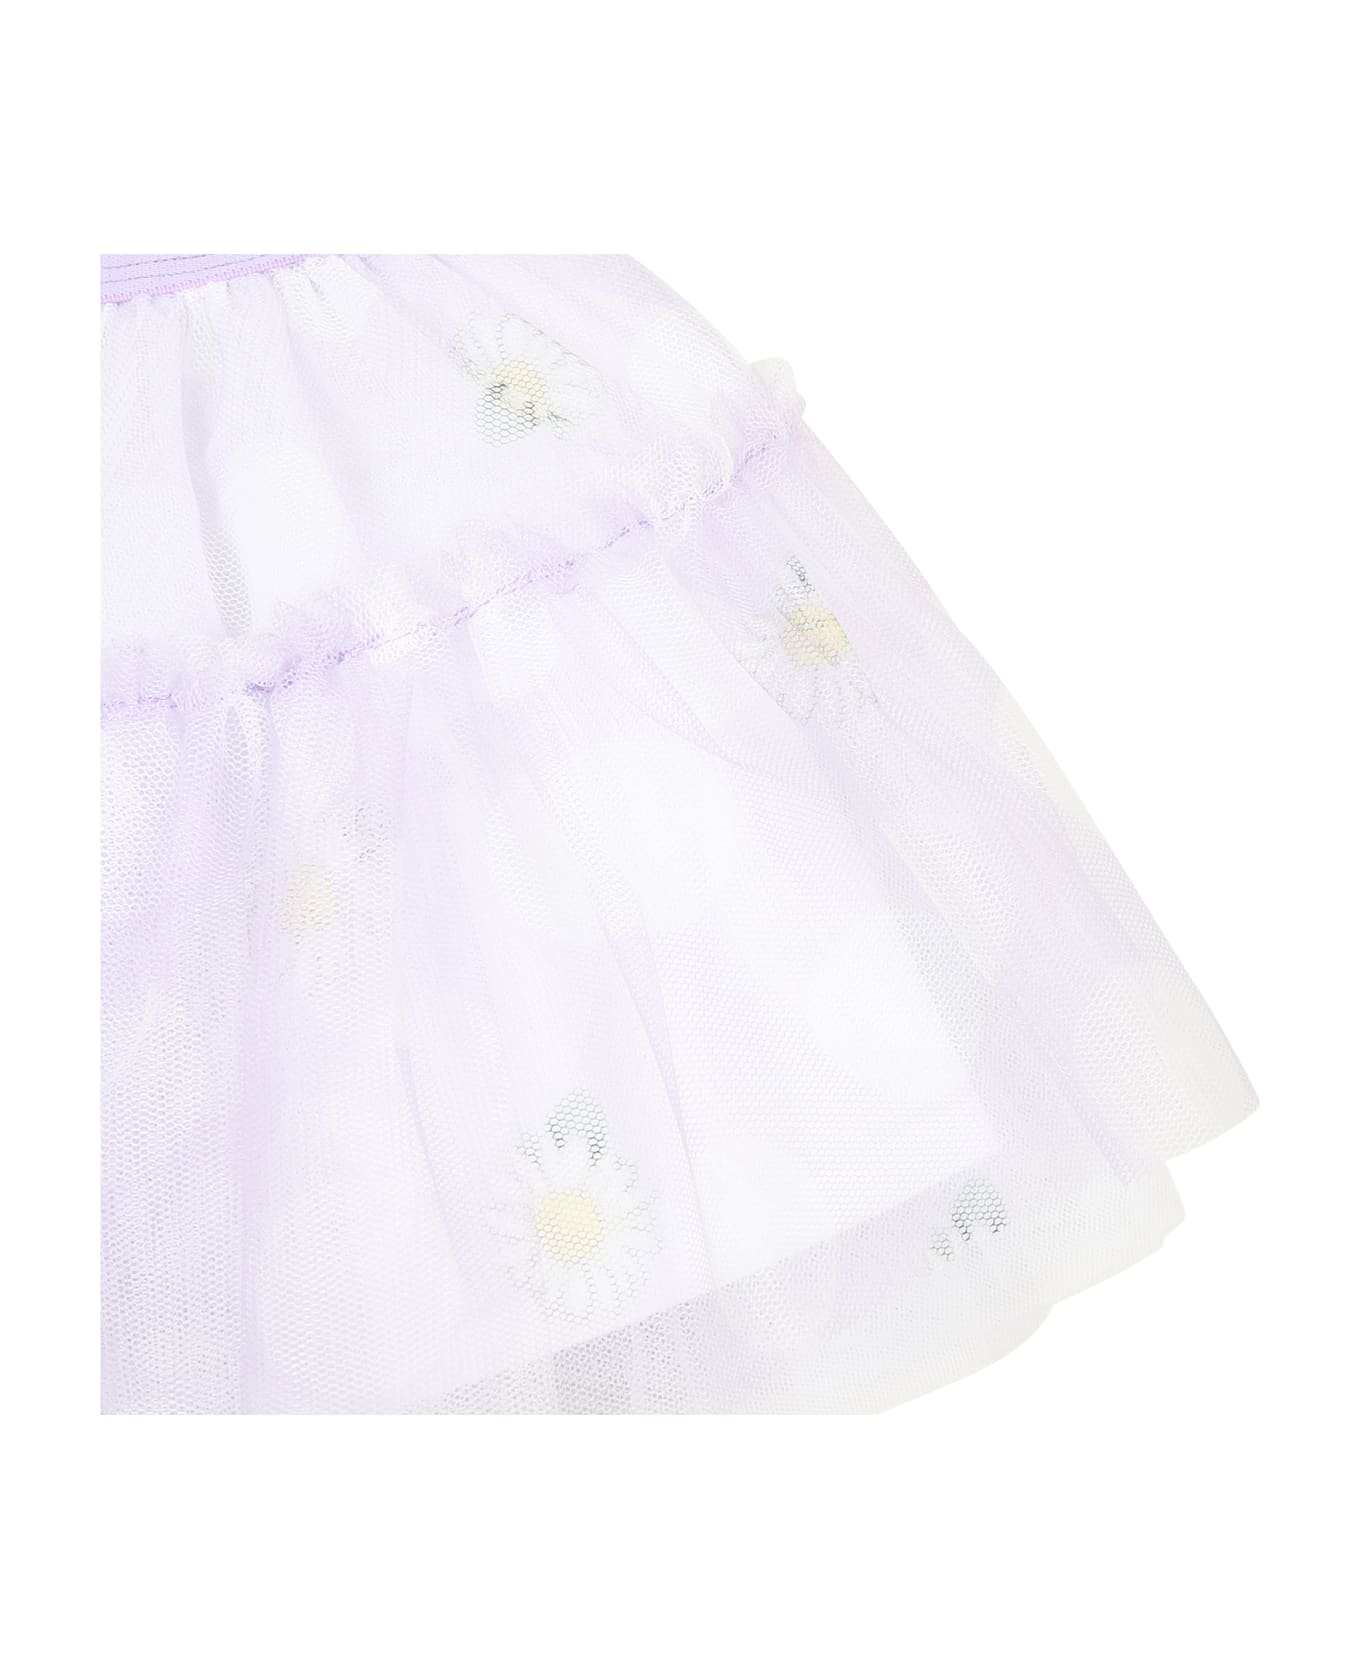 Monnalisa Purple Skirt For Baby Girl With Daisy Print - Violet ボトムス